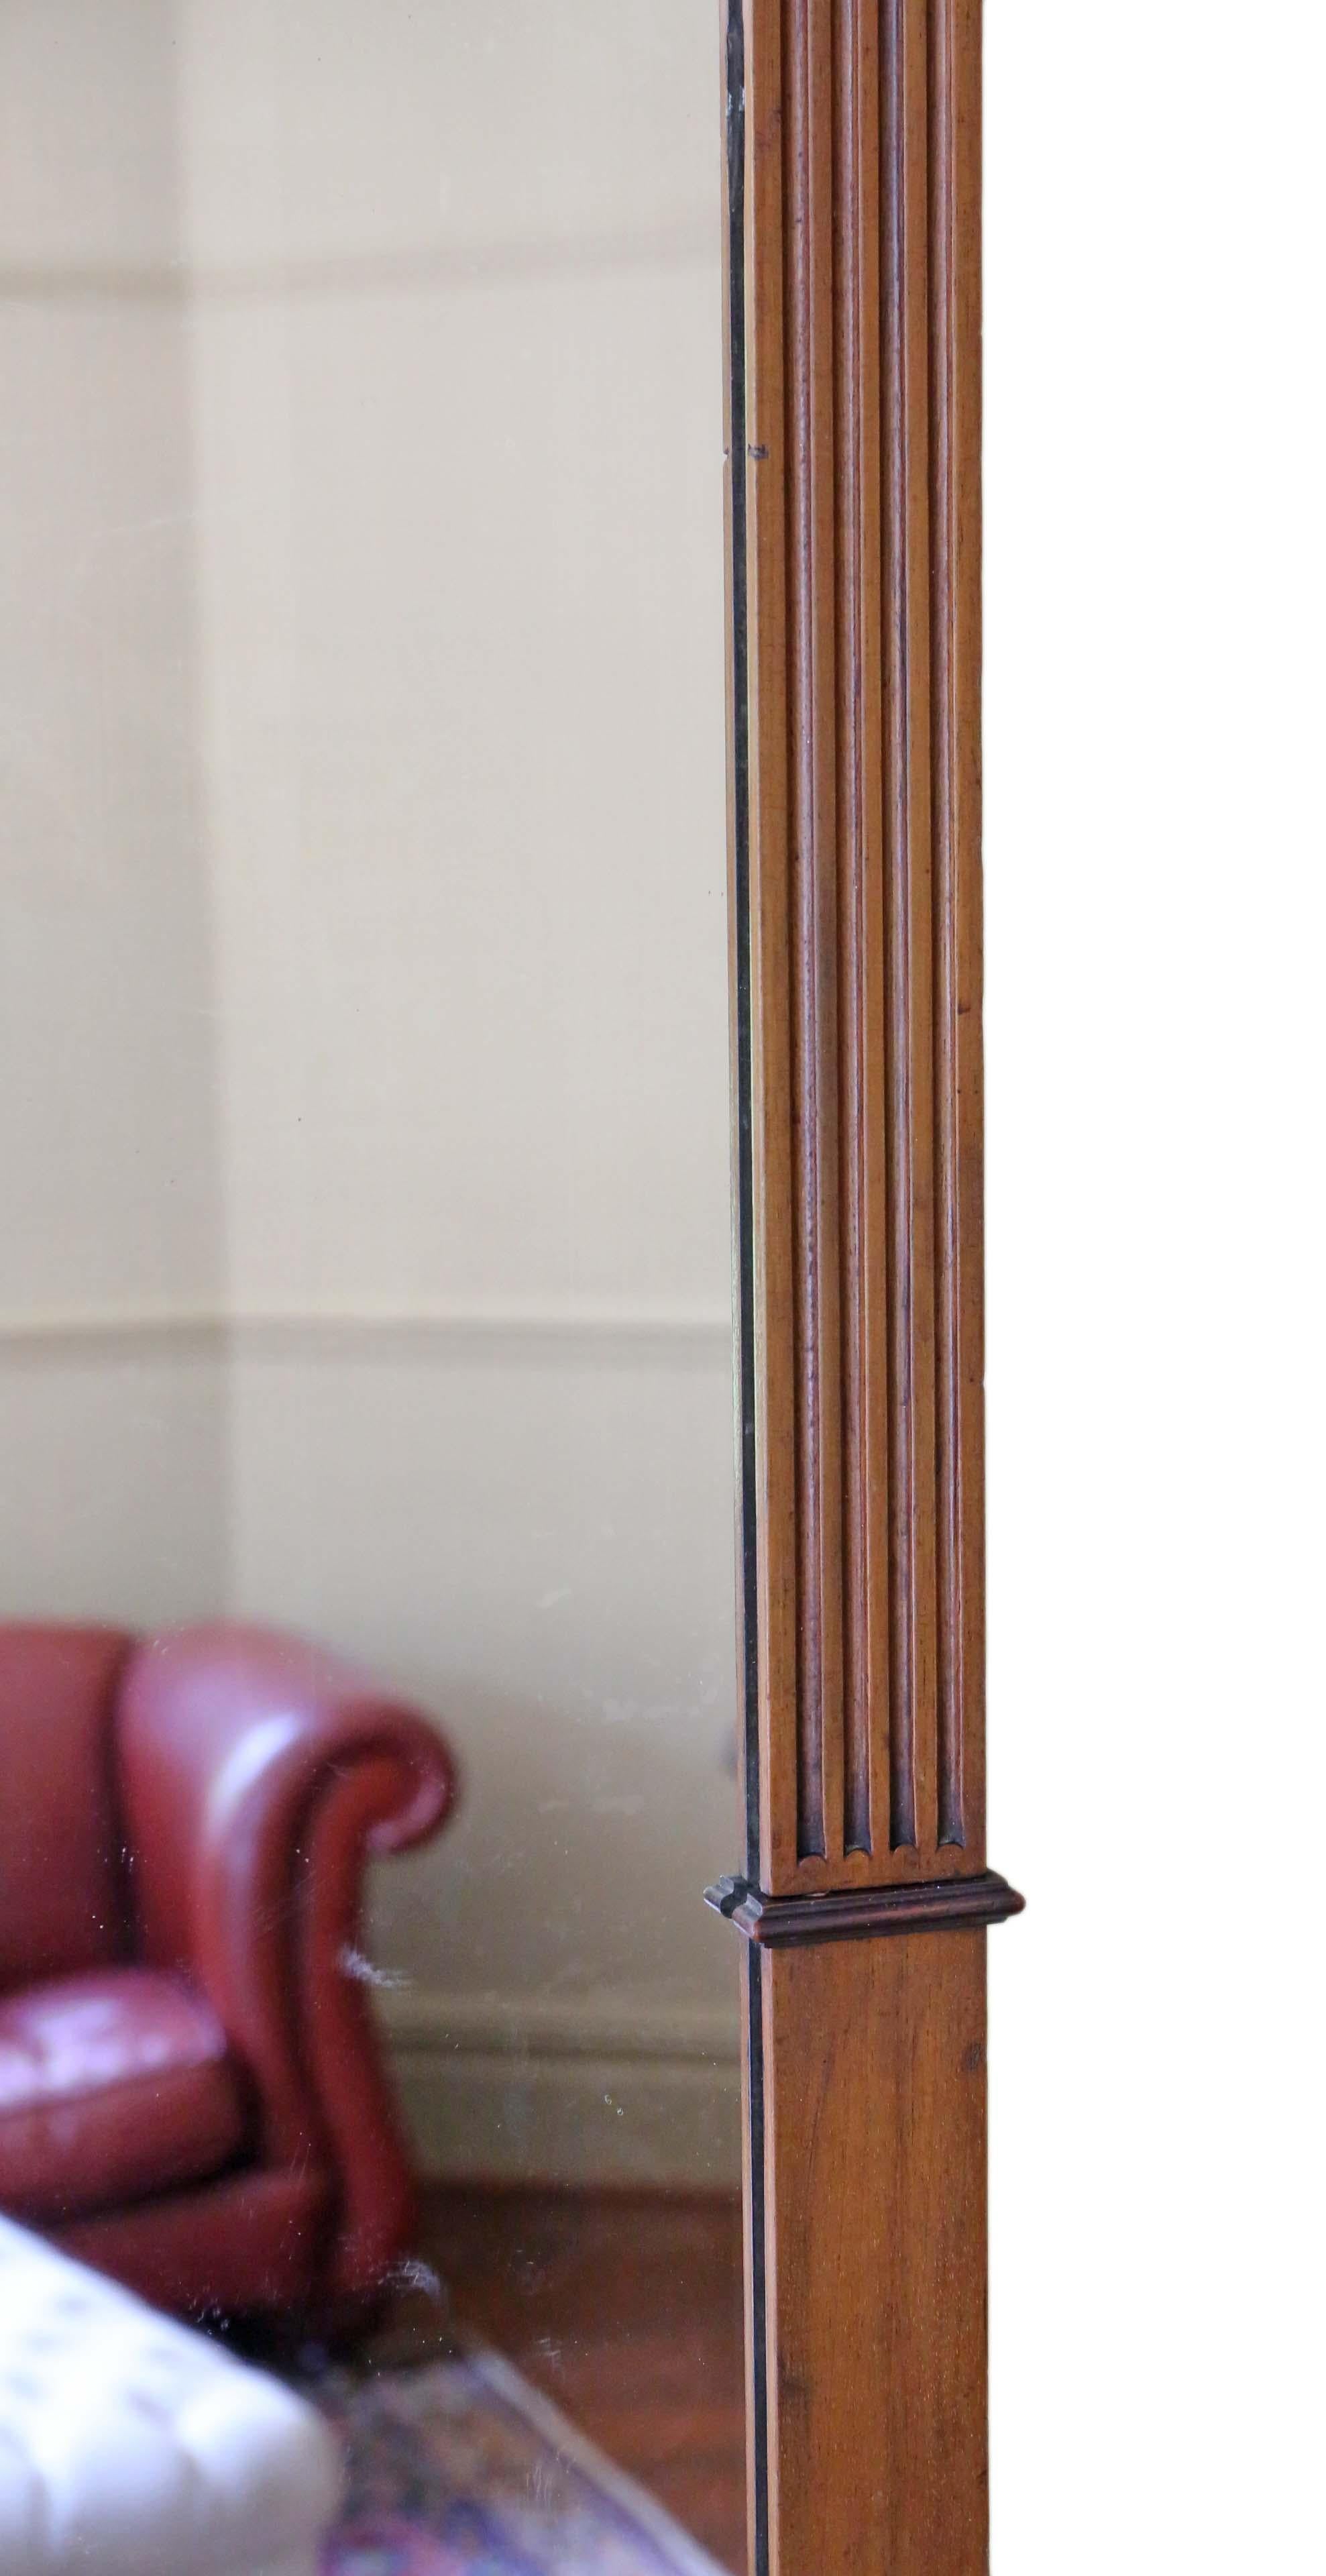 Early 20th Century Victorian Walnut Overmantle or Wall Mirror, circa 1900